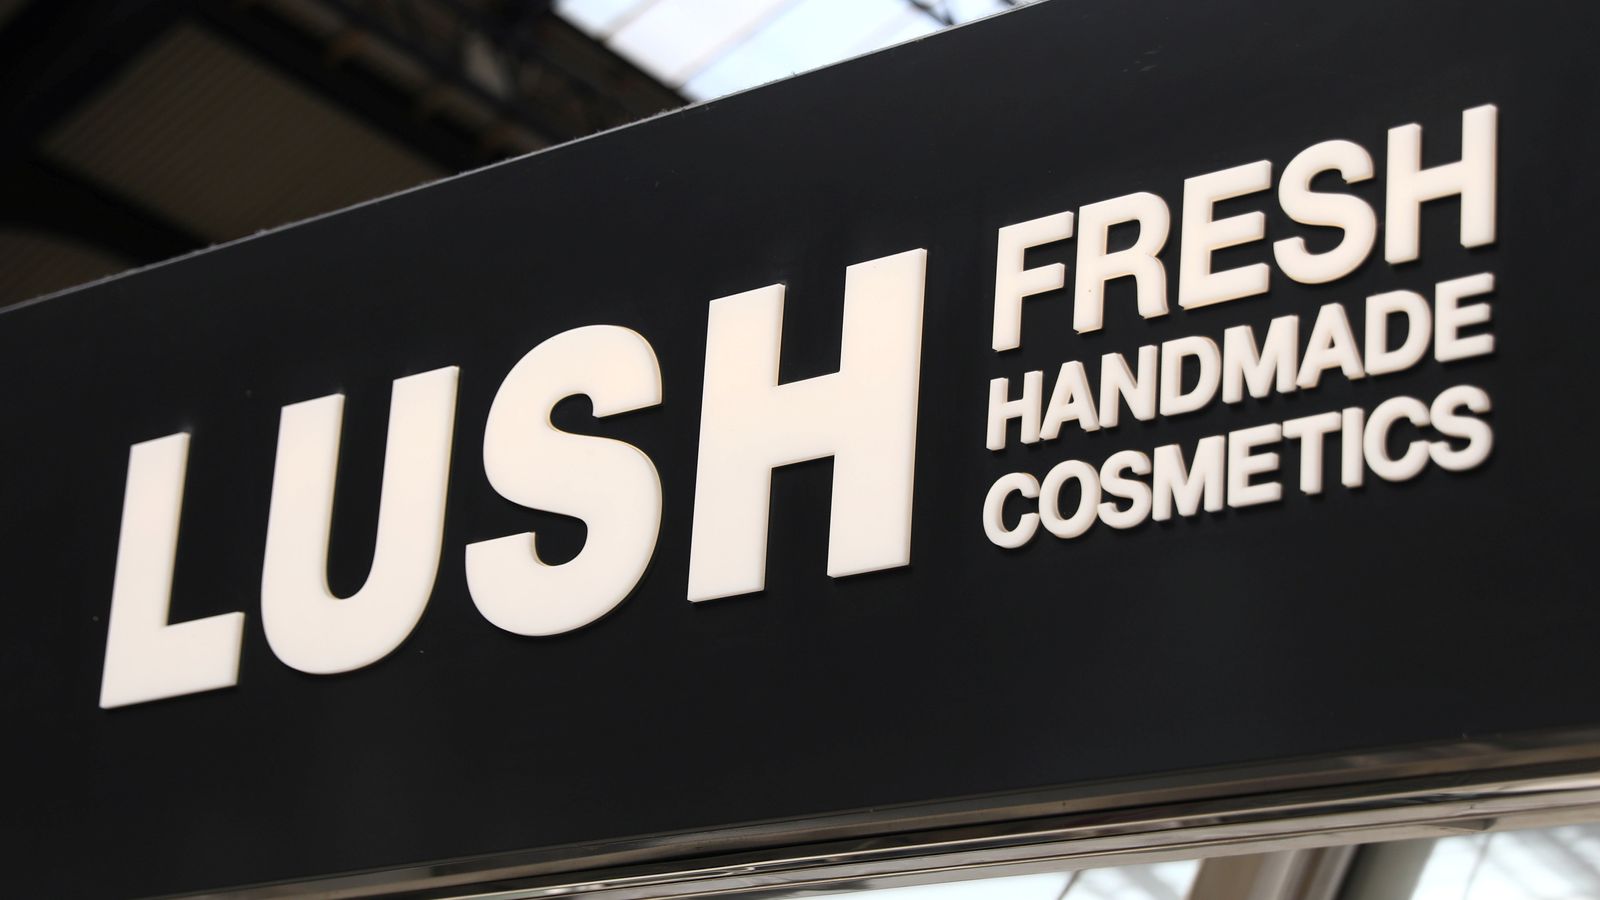 Lush quits Facebook, Instagram, TikTok and Snapchat amid concerns over online harm